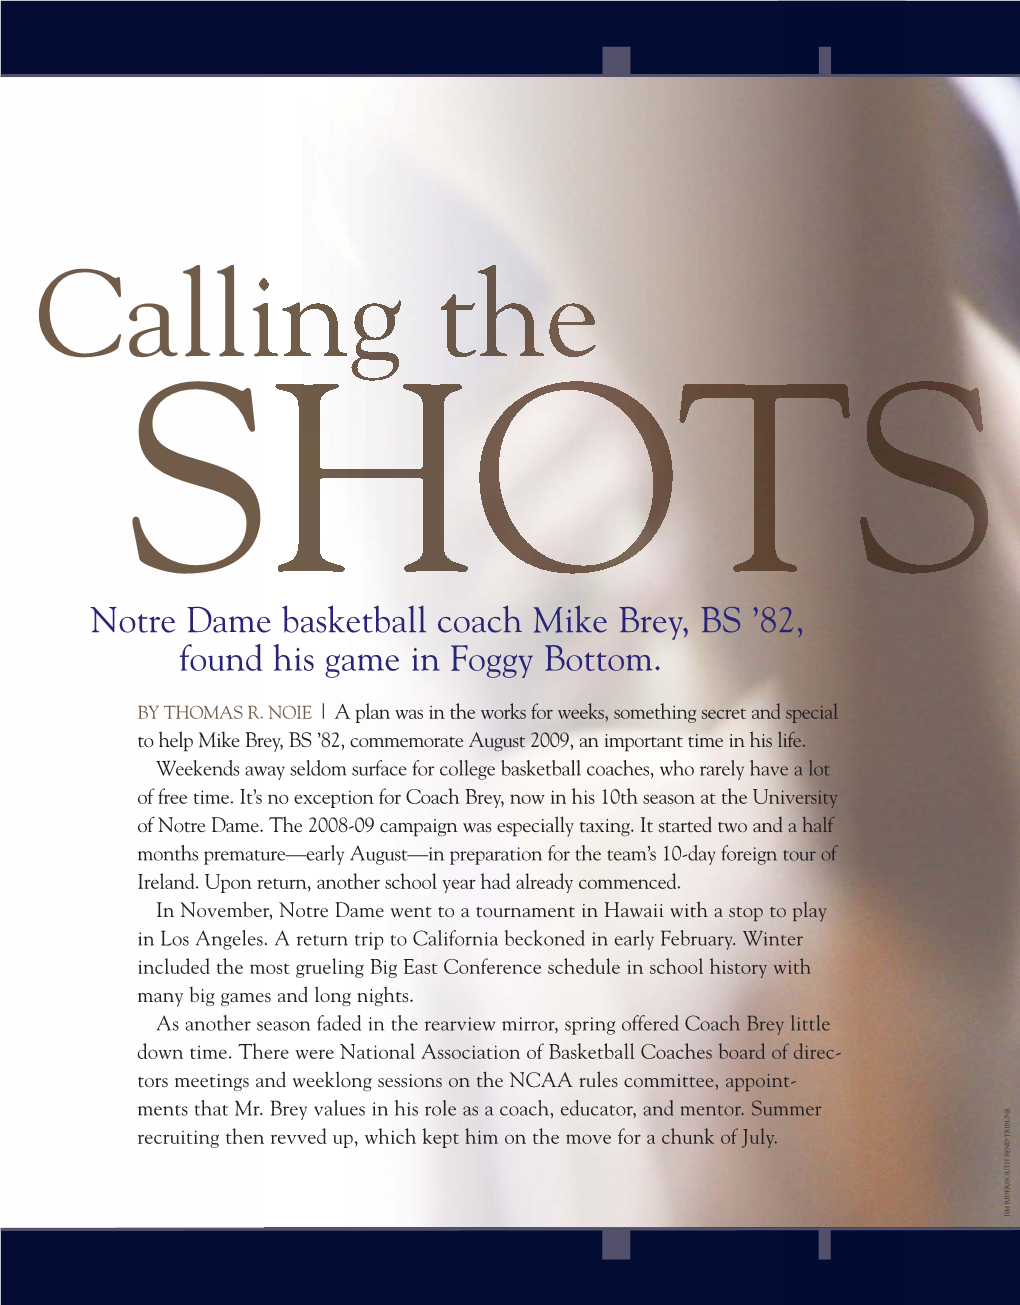 Notre Dame Basketball Coach Mike Brey, BS ’82, Found His Game in Foggy Bottom